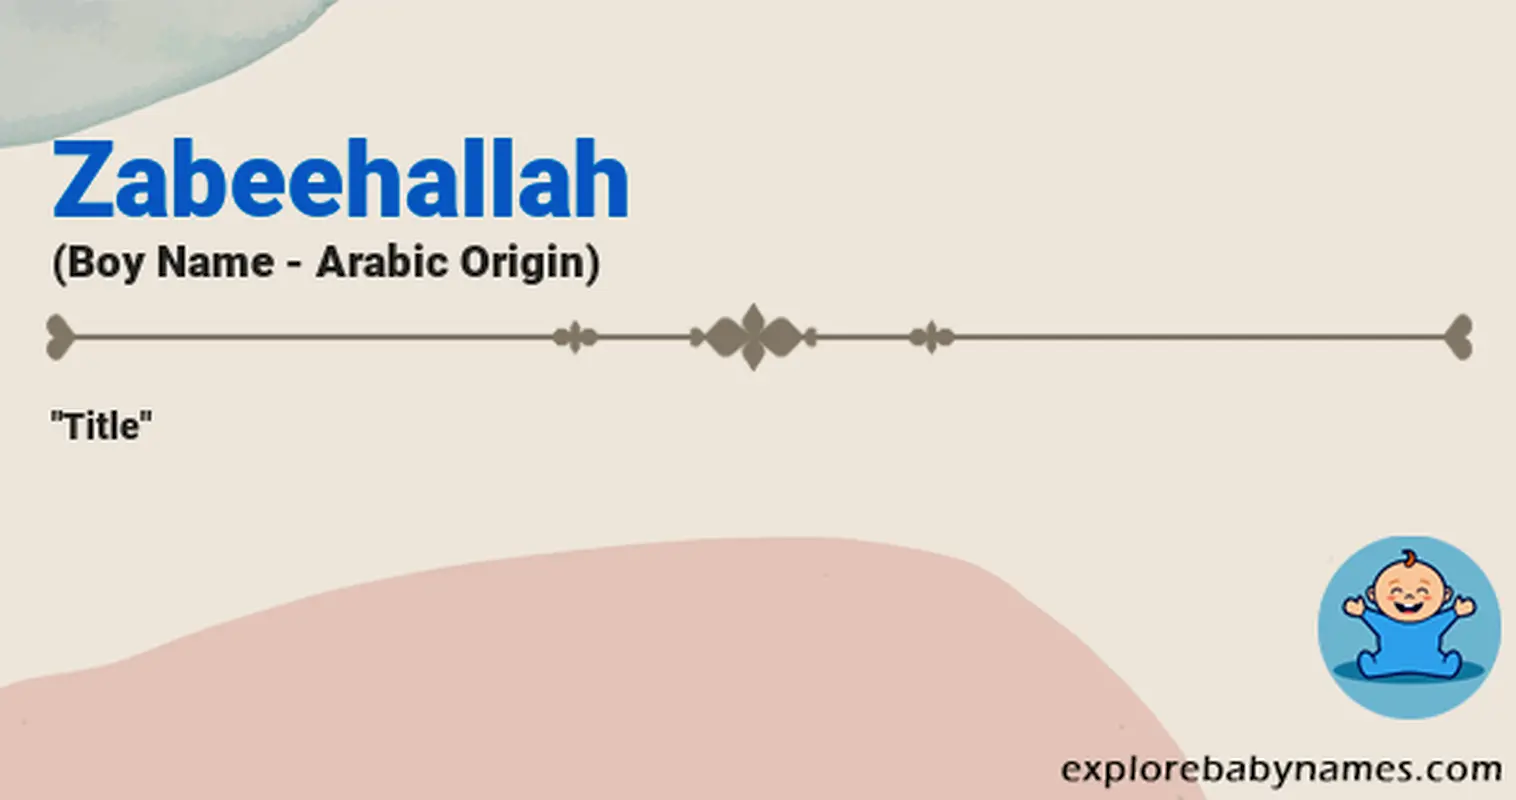 Meaning of Zabeehallah